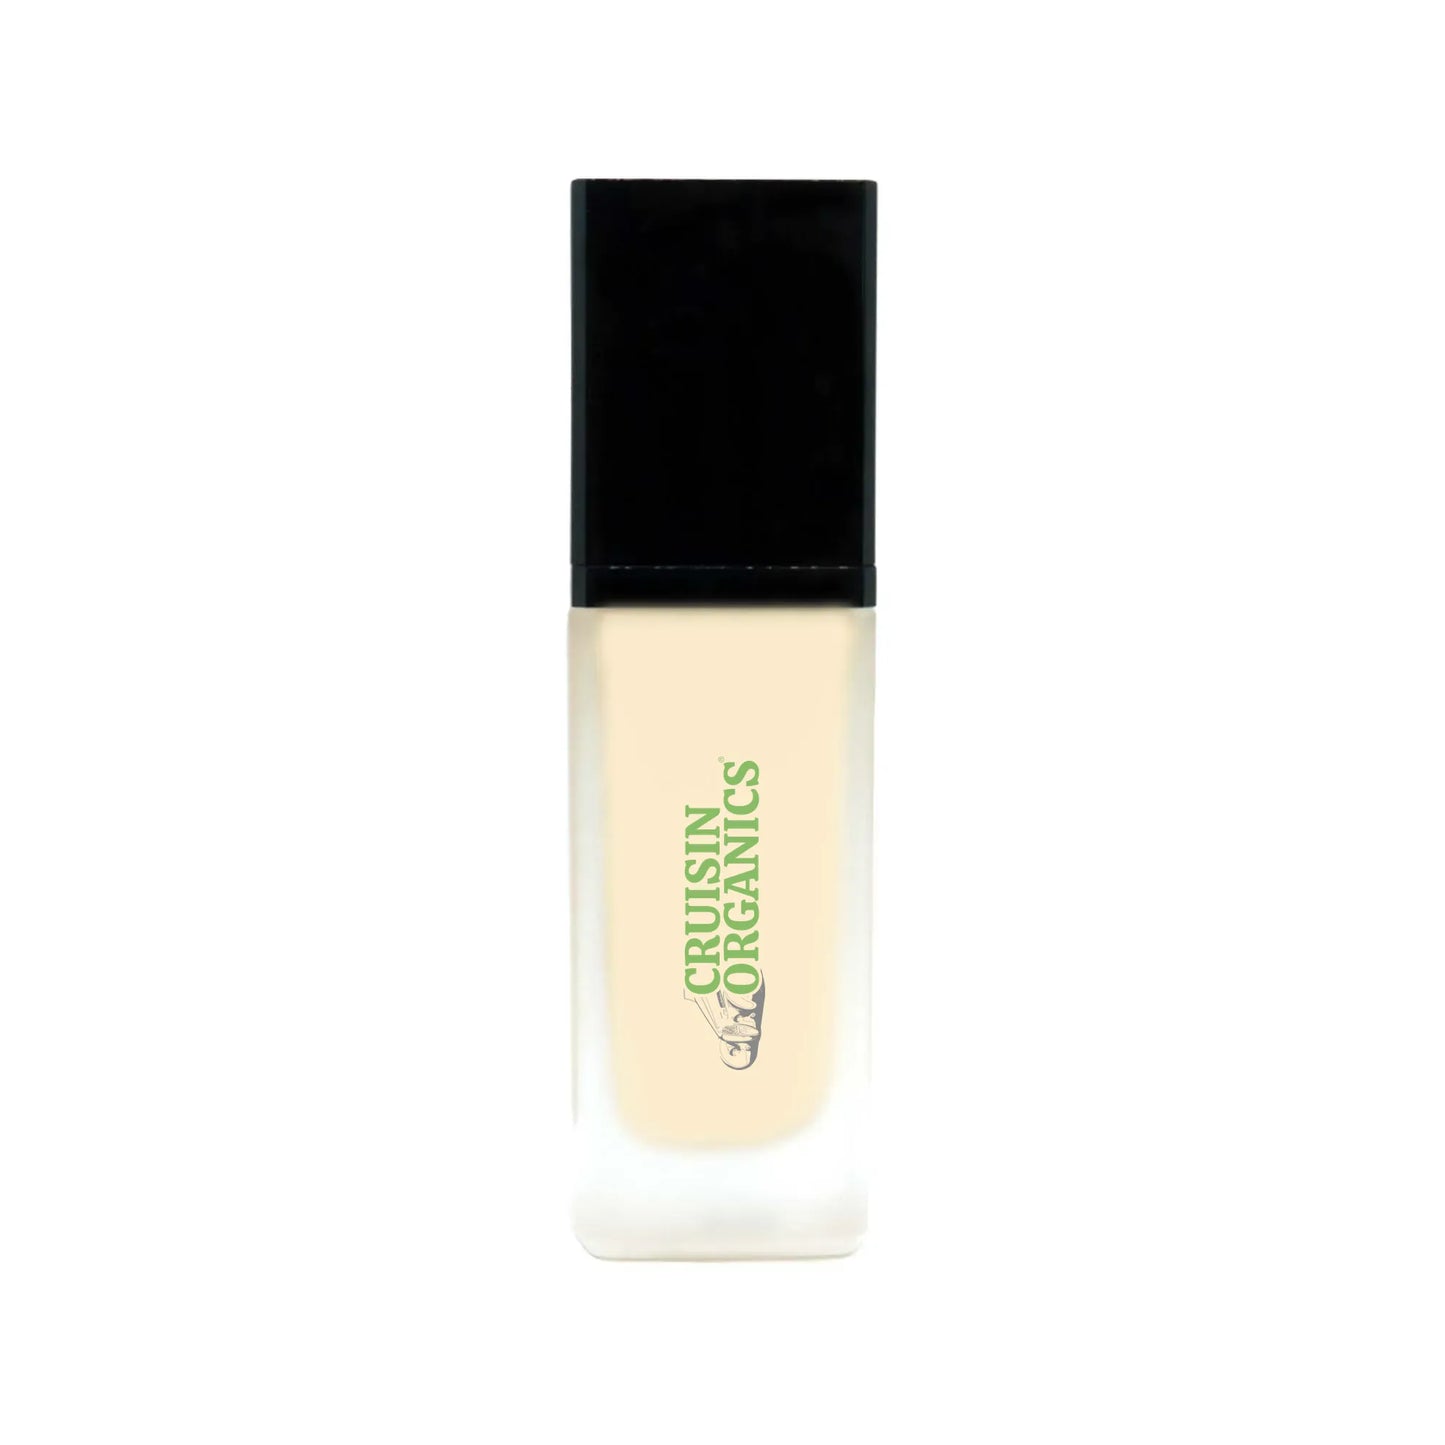 Discover the benefits of Cruisin Organics Translucent Foundation: a lightweight coverage that protects against external factors and enhances your skin's natural porcelain tone. Achieve a flawless and youthful complexion, while promoting a healthy, blemish-free appearance with cool undertones.